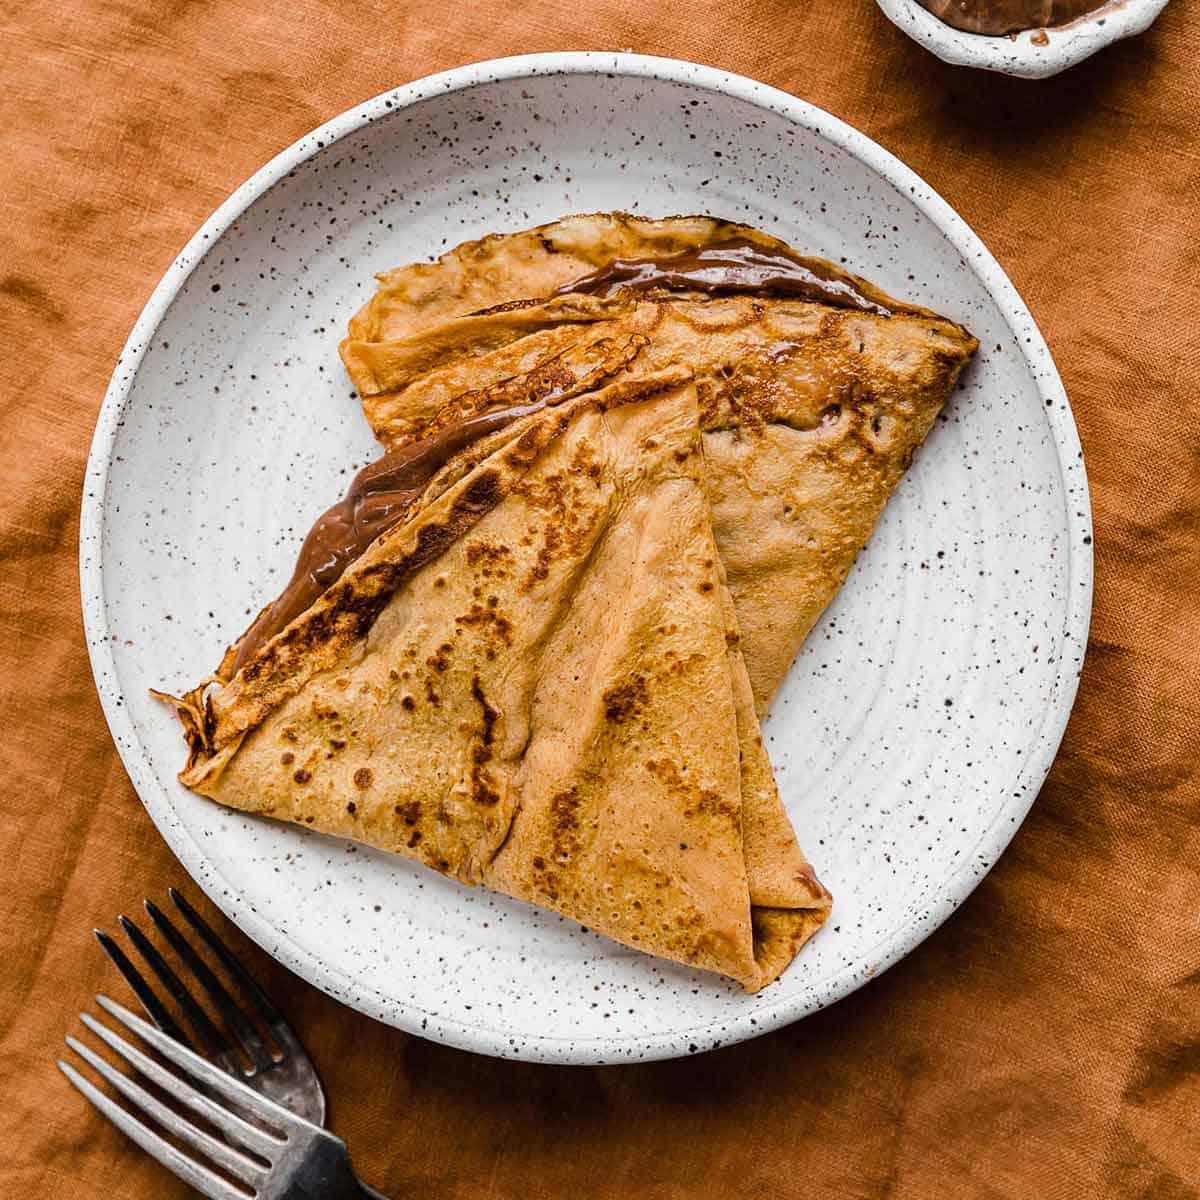 Two Nutella filled pumpkin crepes on a white plate.